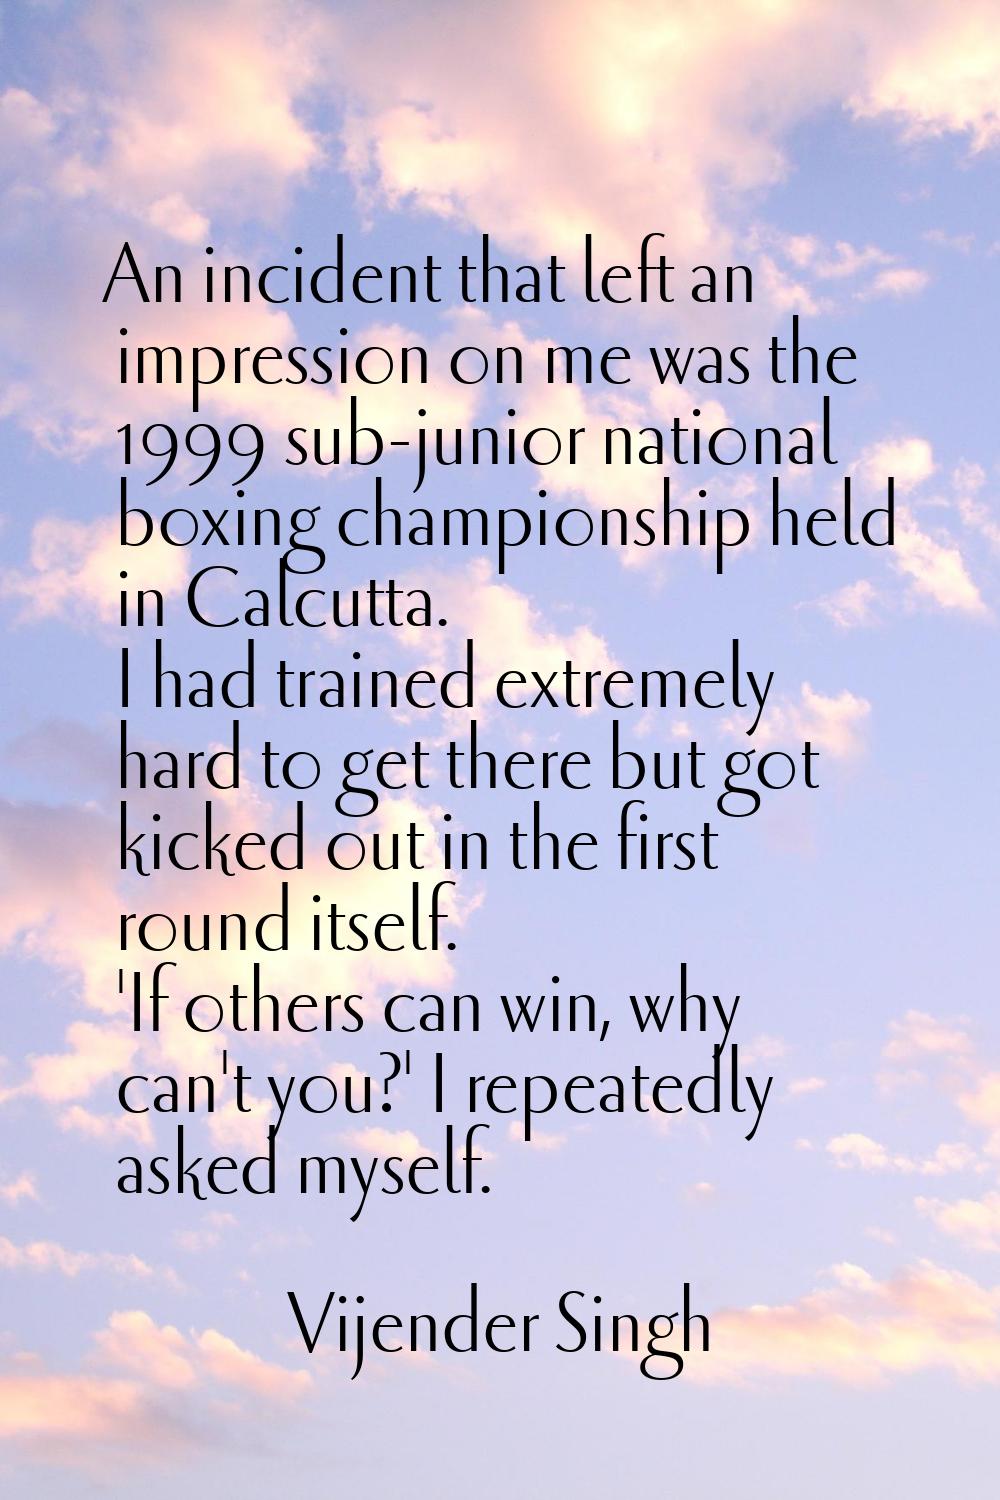 An incident that left an impression on me was the 1999 sub-junior national boxing championship held